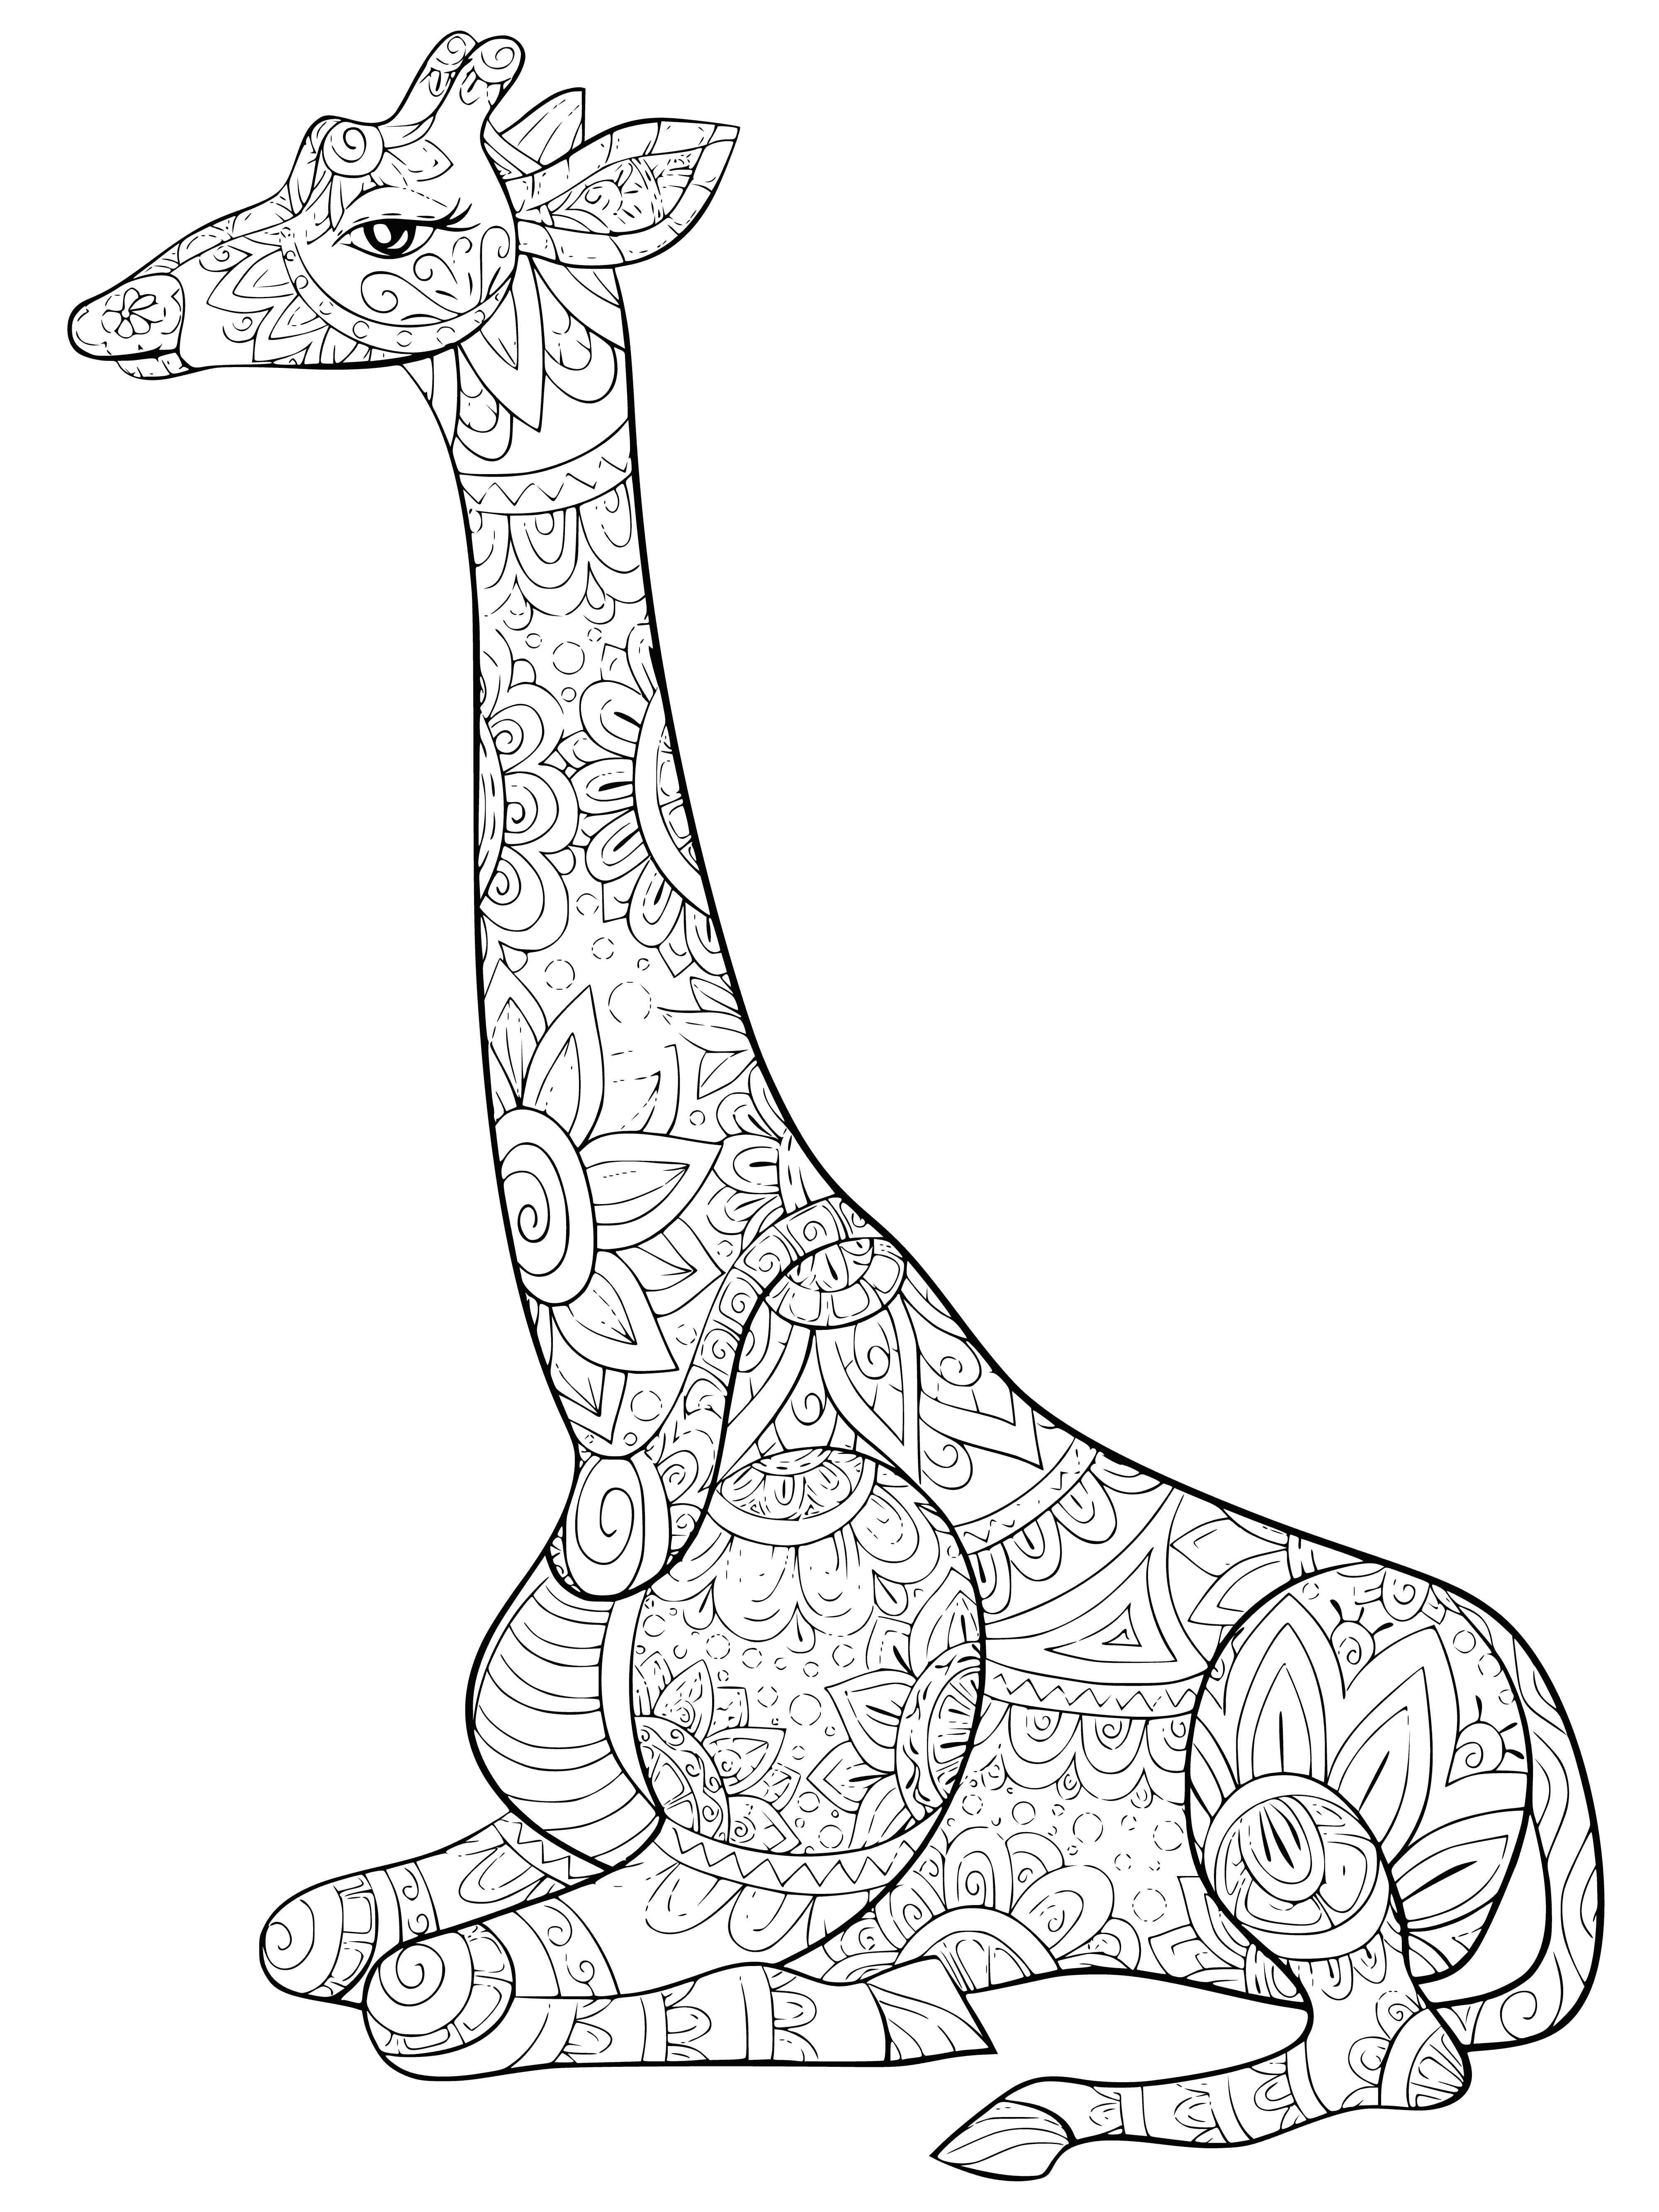 coloring page: Giraffe in field of grass with patchwork coat, bringing peace & calm through gentle presence. #Zoo #Travel